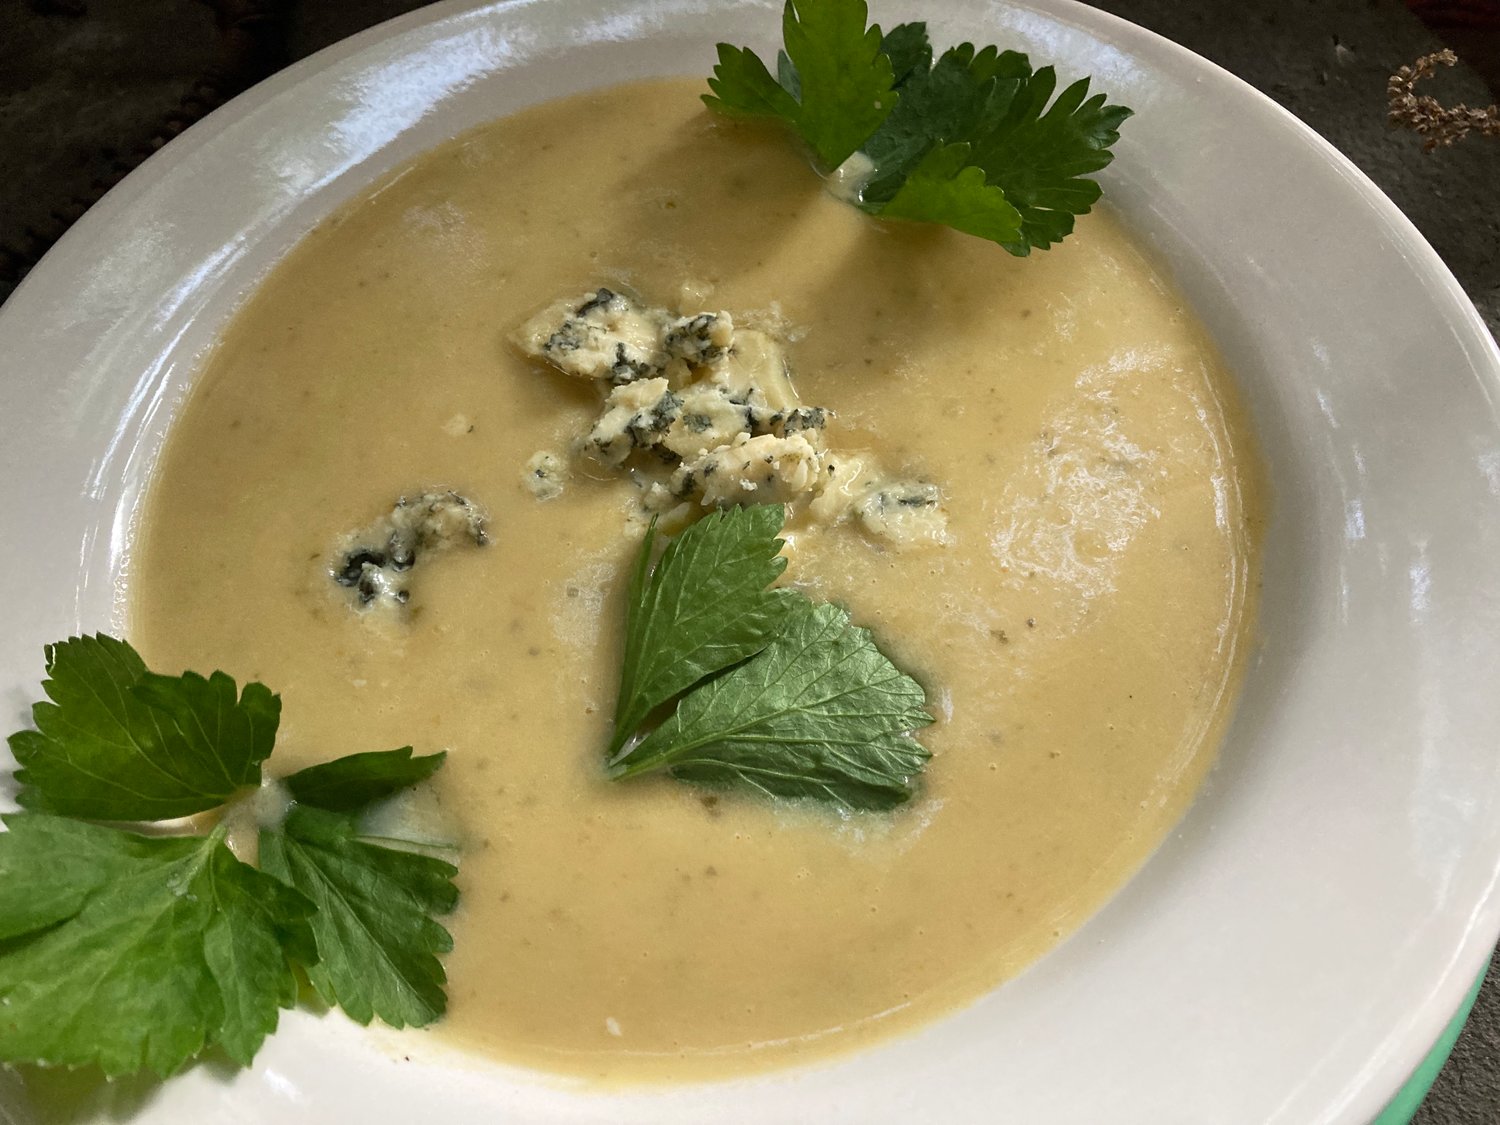 Stilton’s buttery, mellow tang enhances the flavor of this soup made with potatoes, celery, onions and heavy cream.